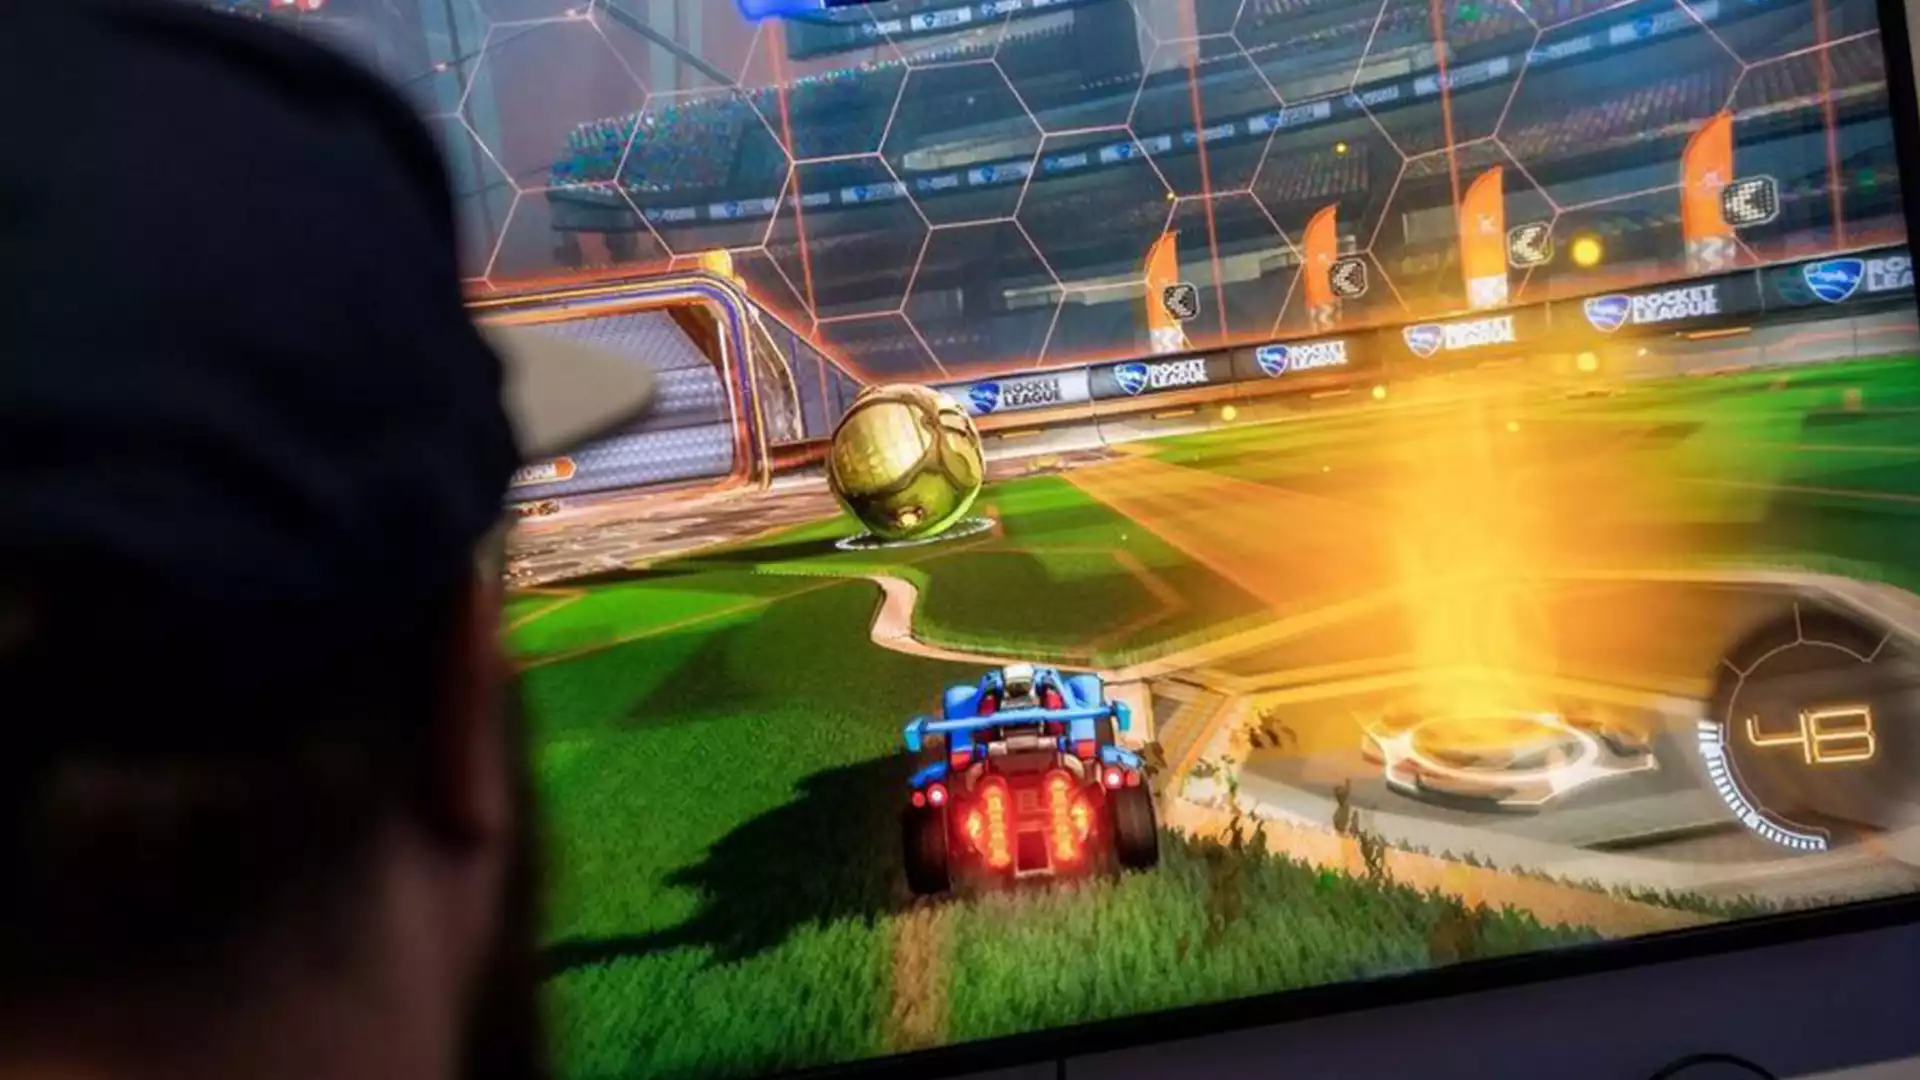 Mixed start to the season Rocket League Major without German participation